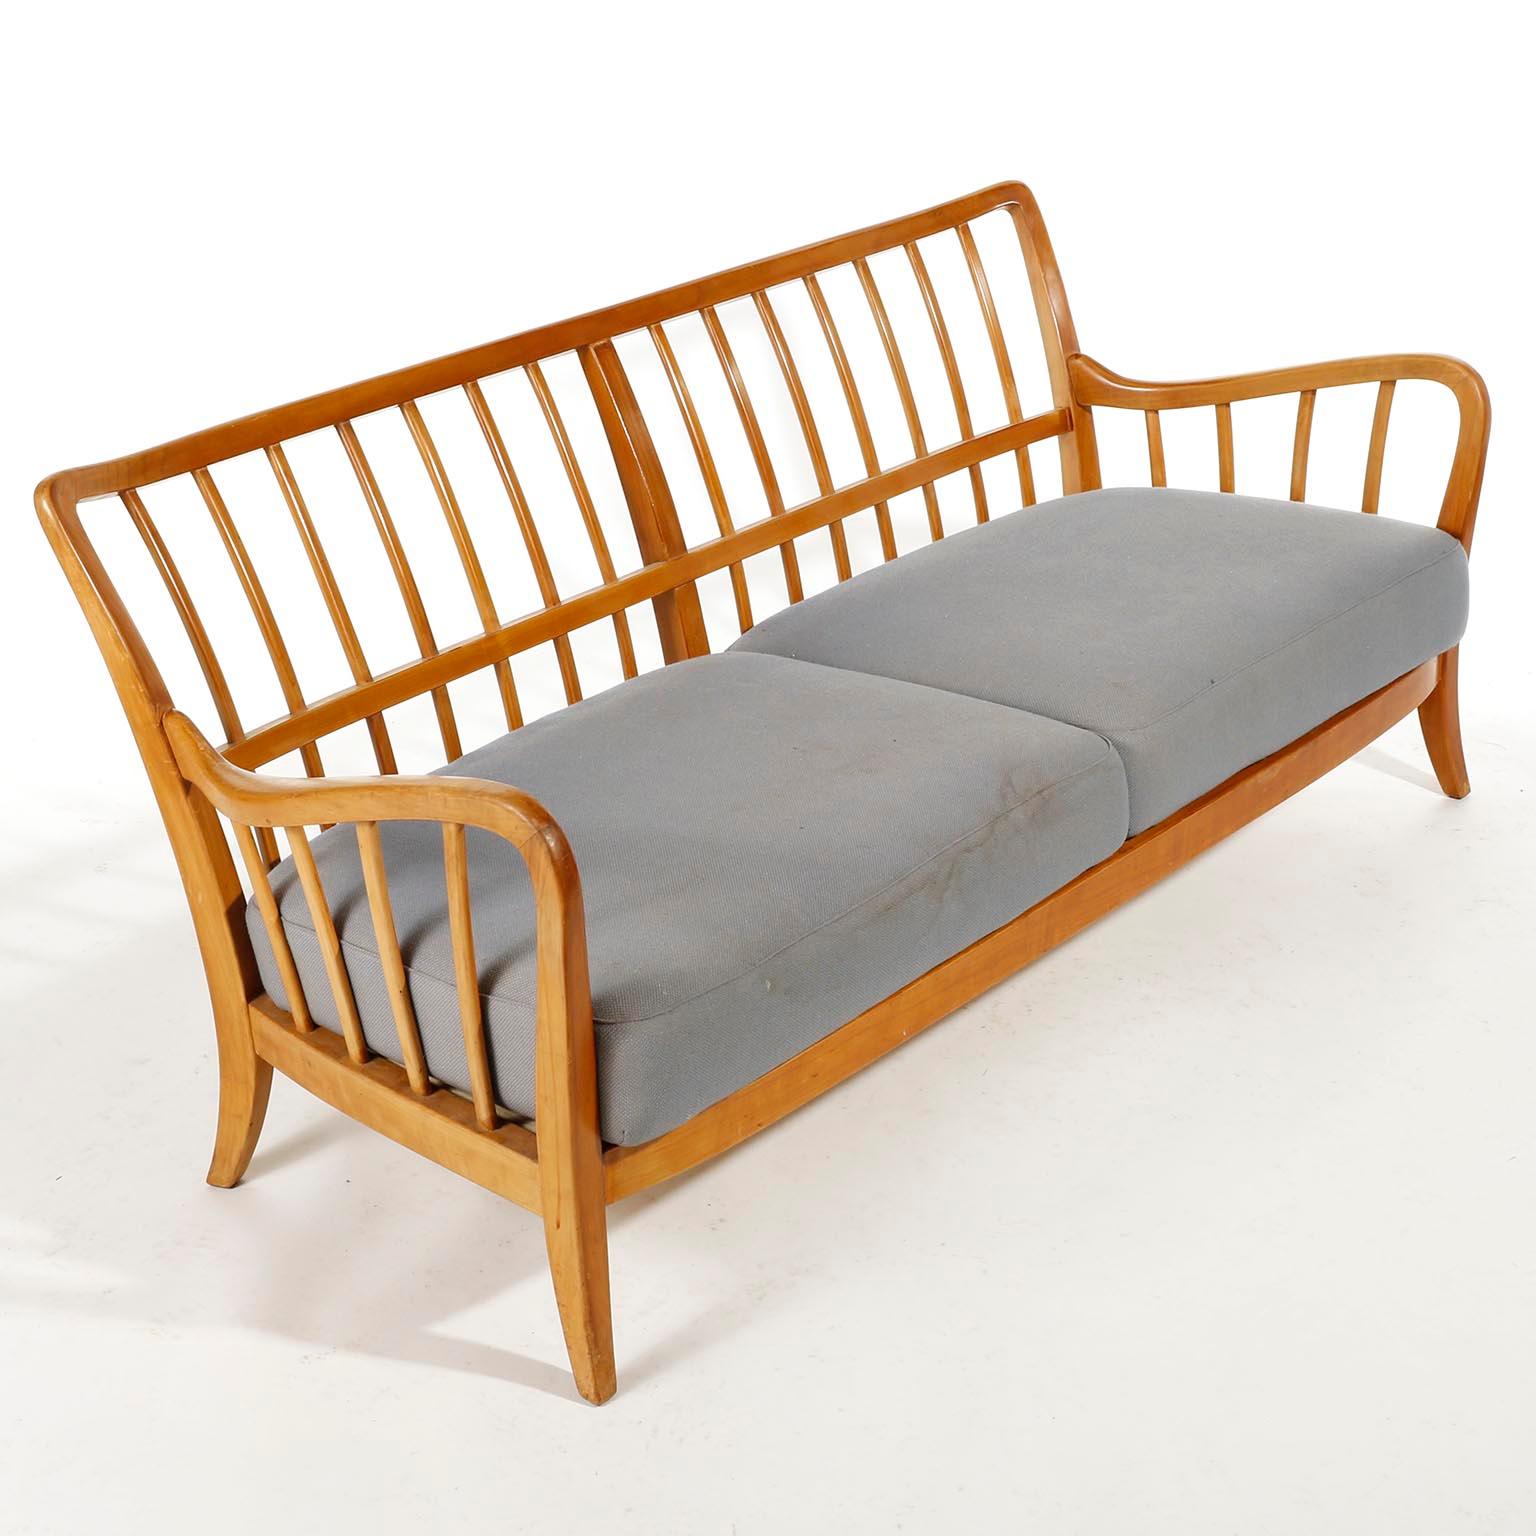 Mid-20th Century Bench Seette Seat by Thonet, Attributed to Josef Frank, Wood, 1940 For Sale